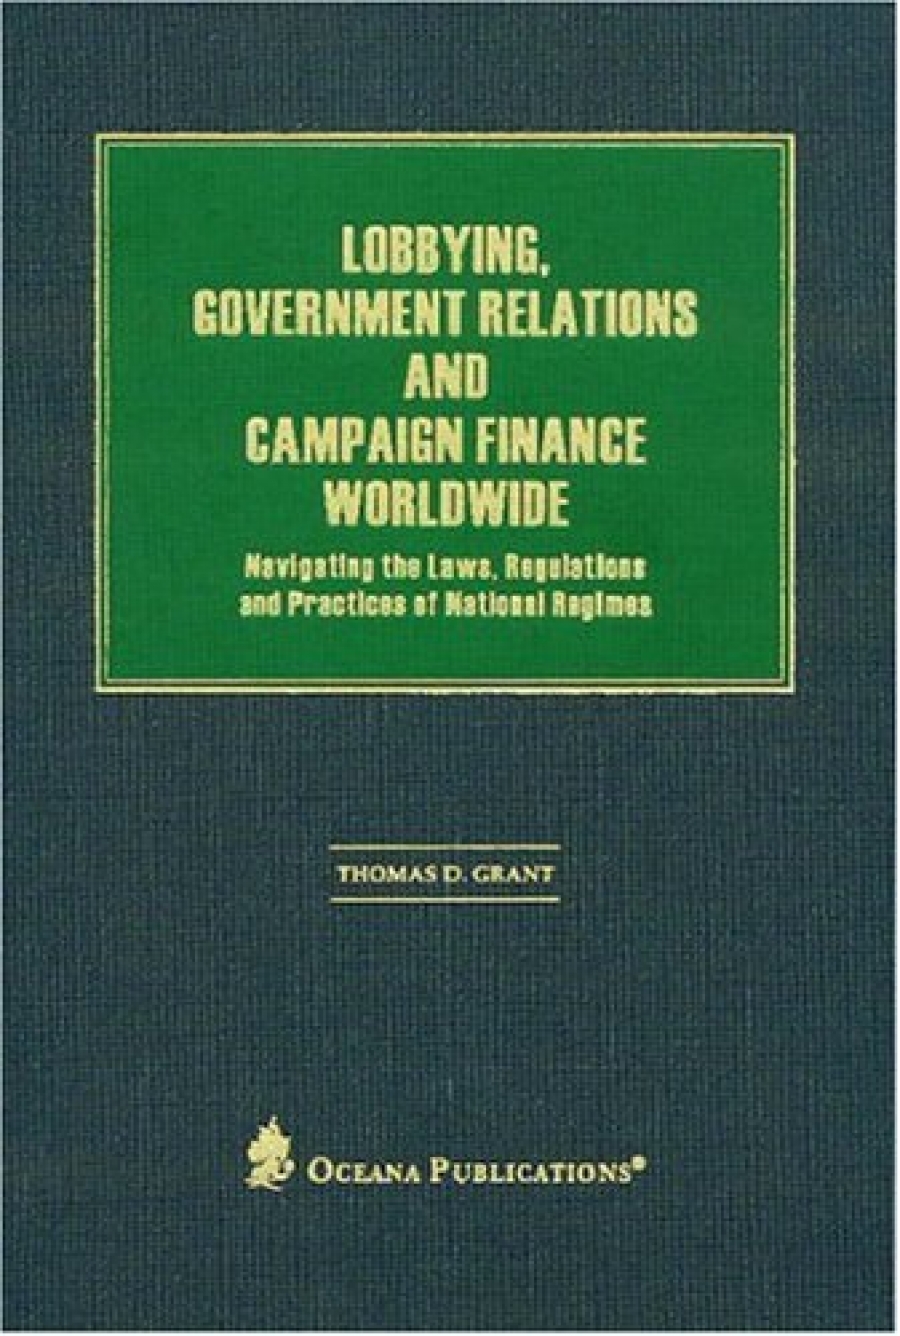 Grant, Thomas Lobbying, Government Relations, and Campaign Finance Worldwide: Navigating the Laws, Regulations and 